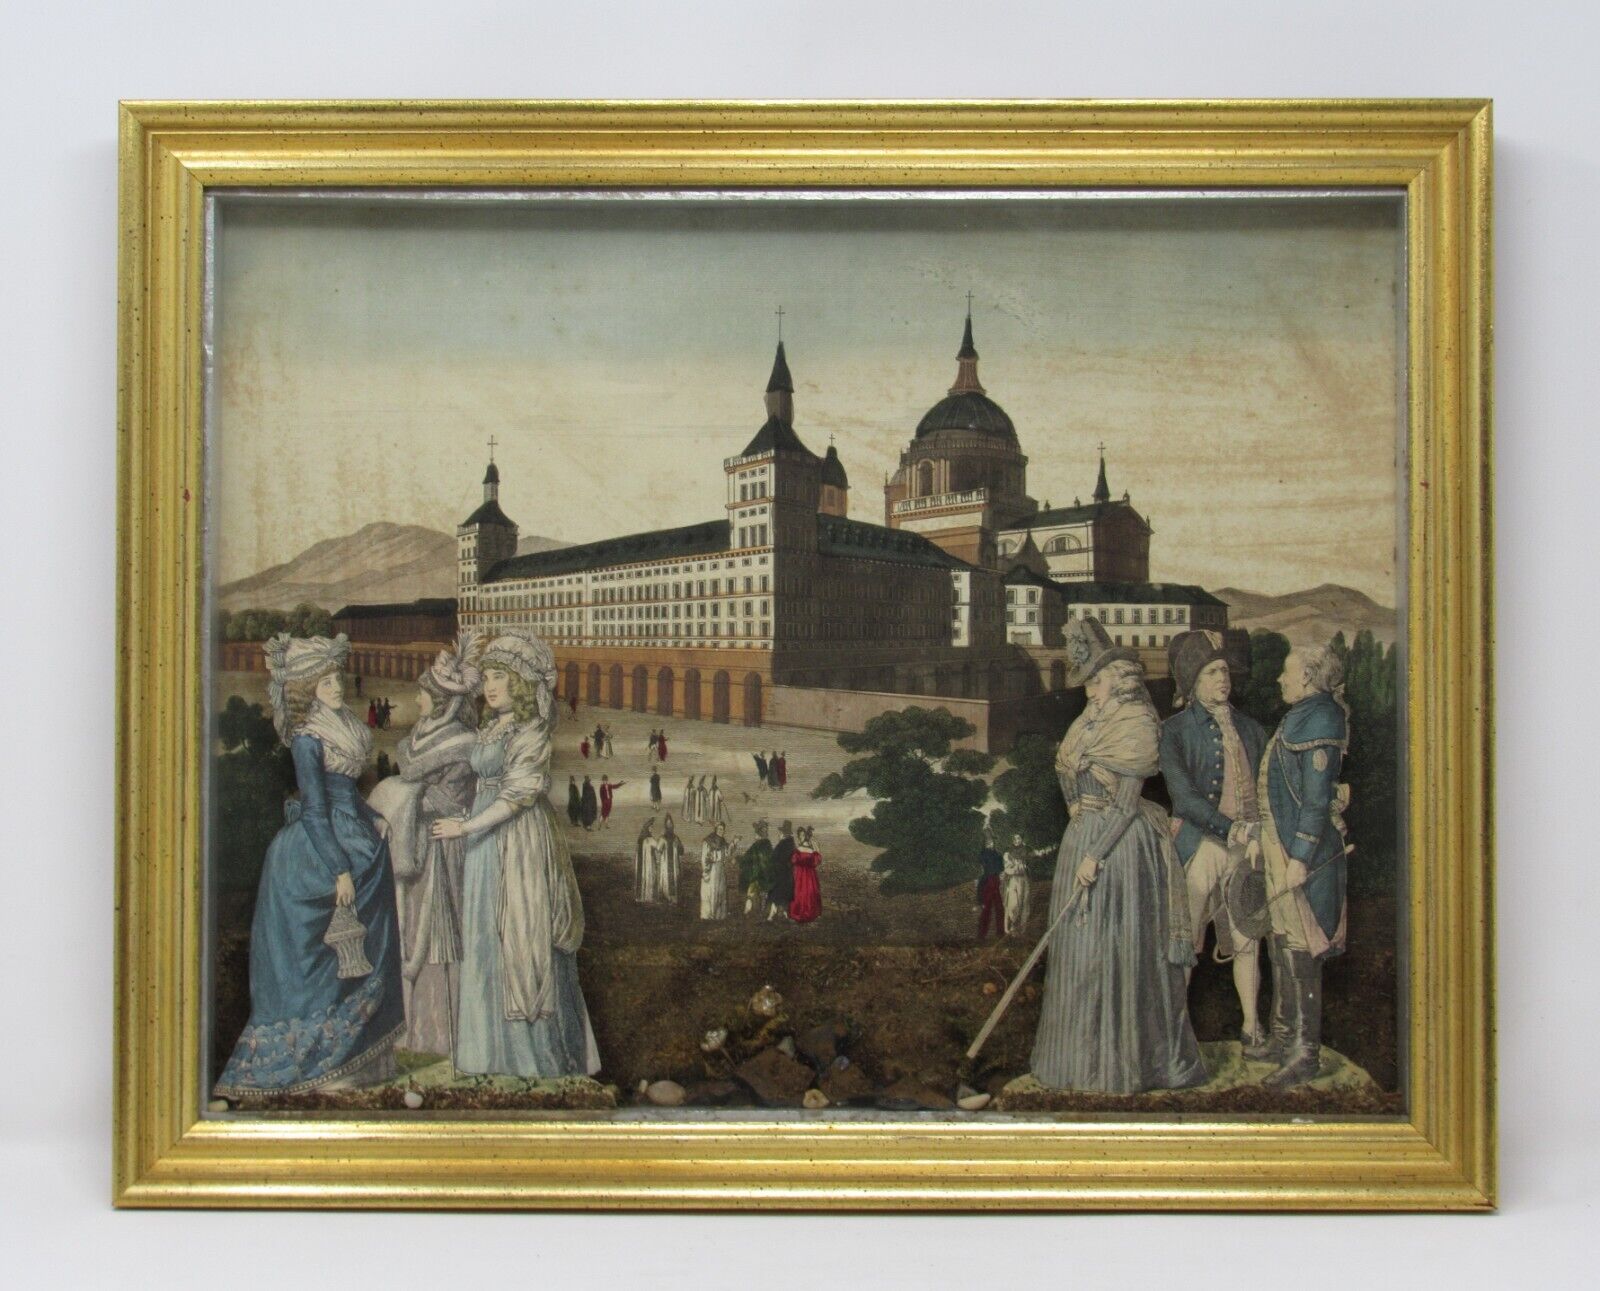 18th Century French Diorama Shadowbox of the Monastery Escurial in Madrid